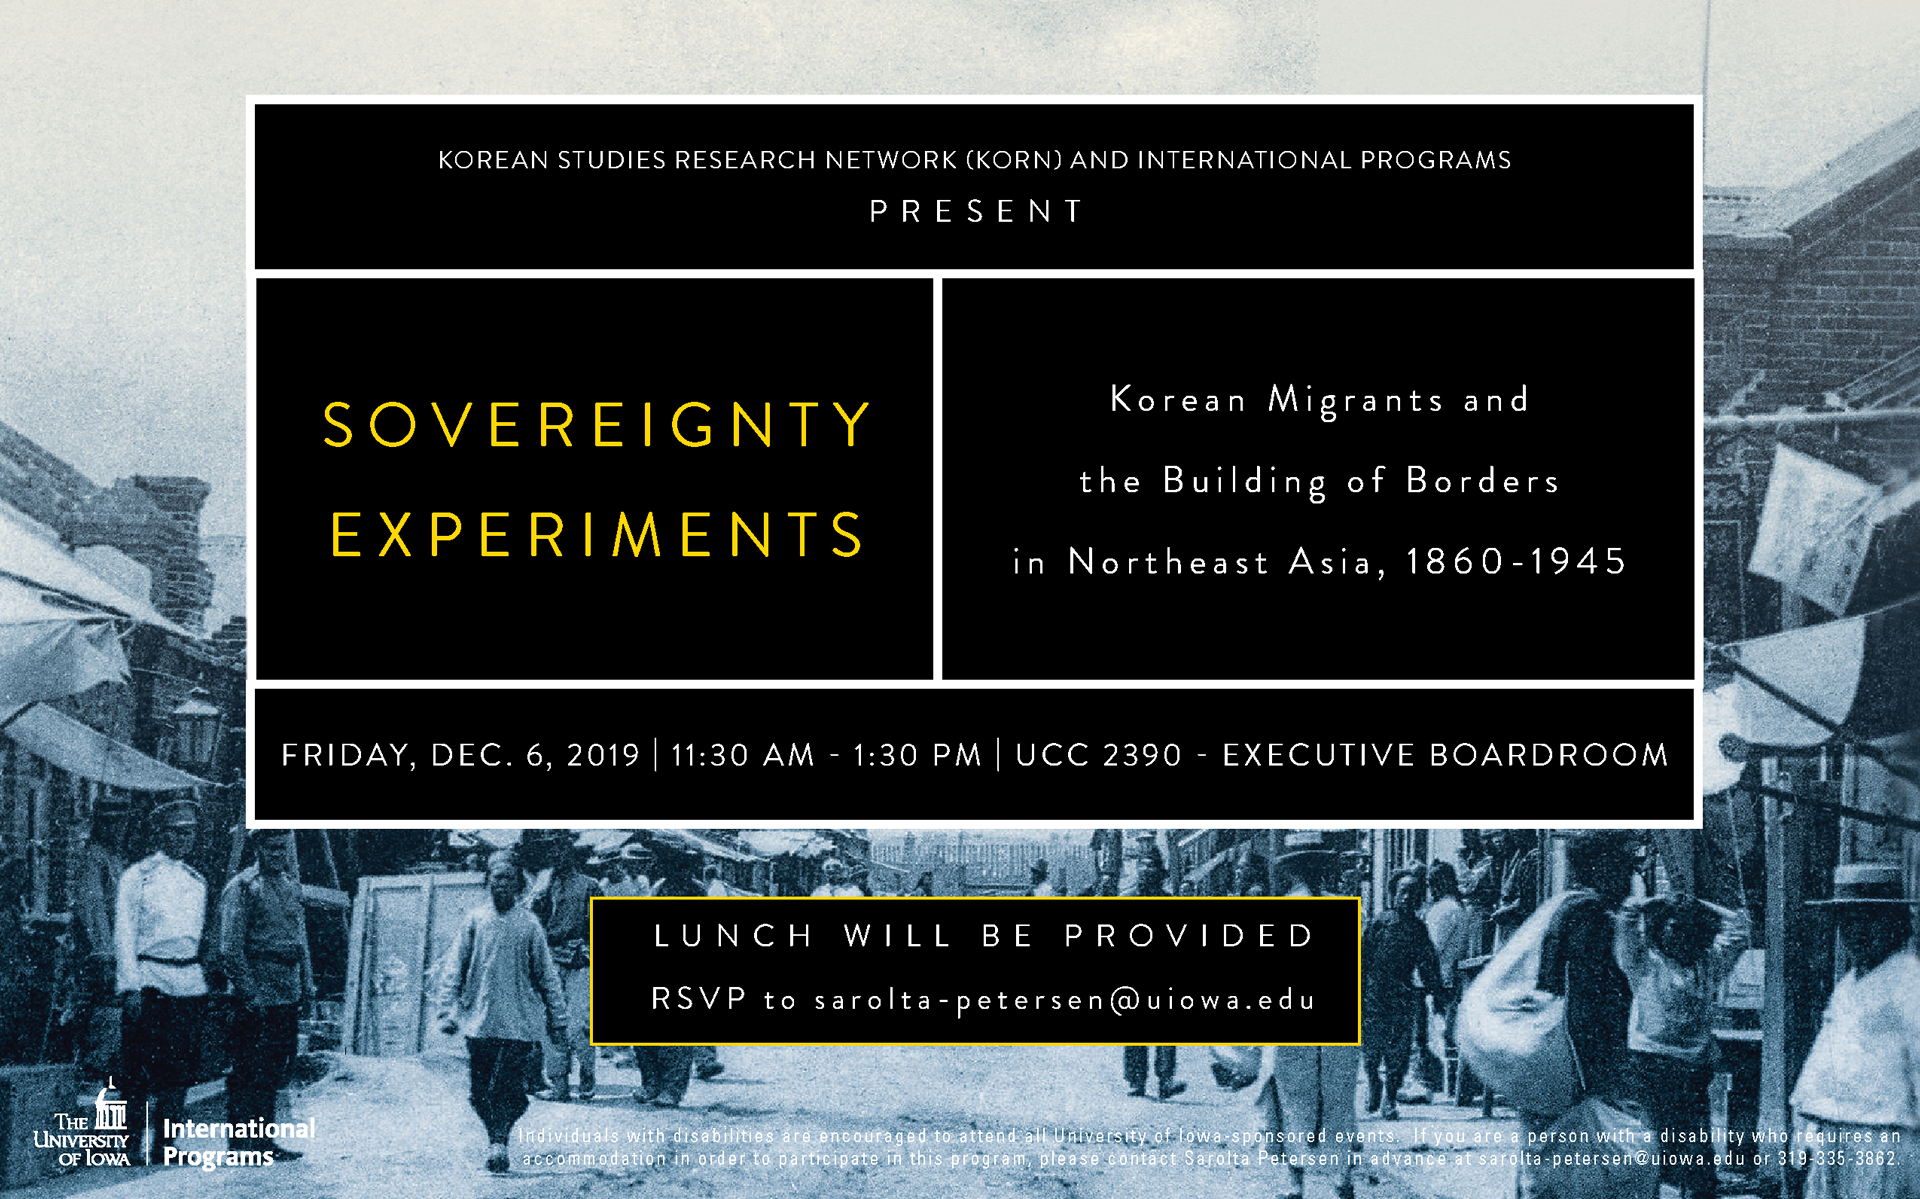 Sovereignty experiements Friday 12/6/19 @11:30 am - 1:30 pm in UCC 2390 - executive boardroom lunch will be provided topic: Korean migrants and the building of the borders in northest Asia 1860-1945